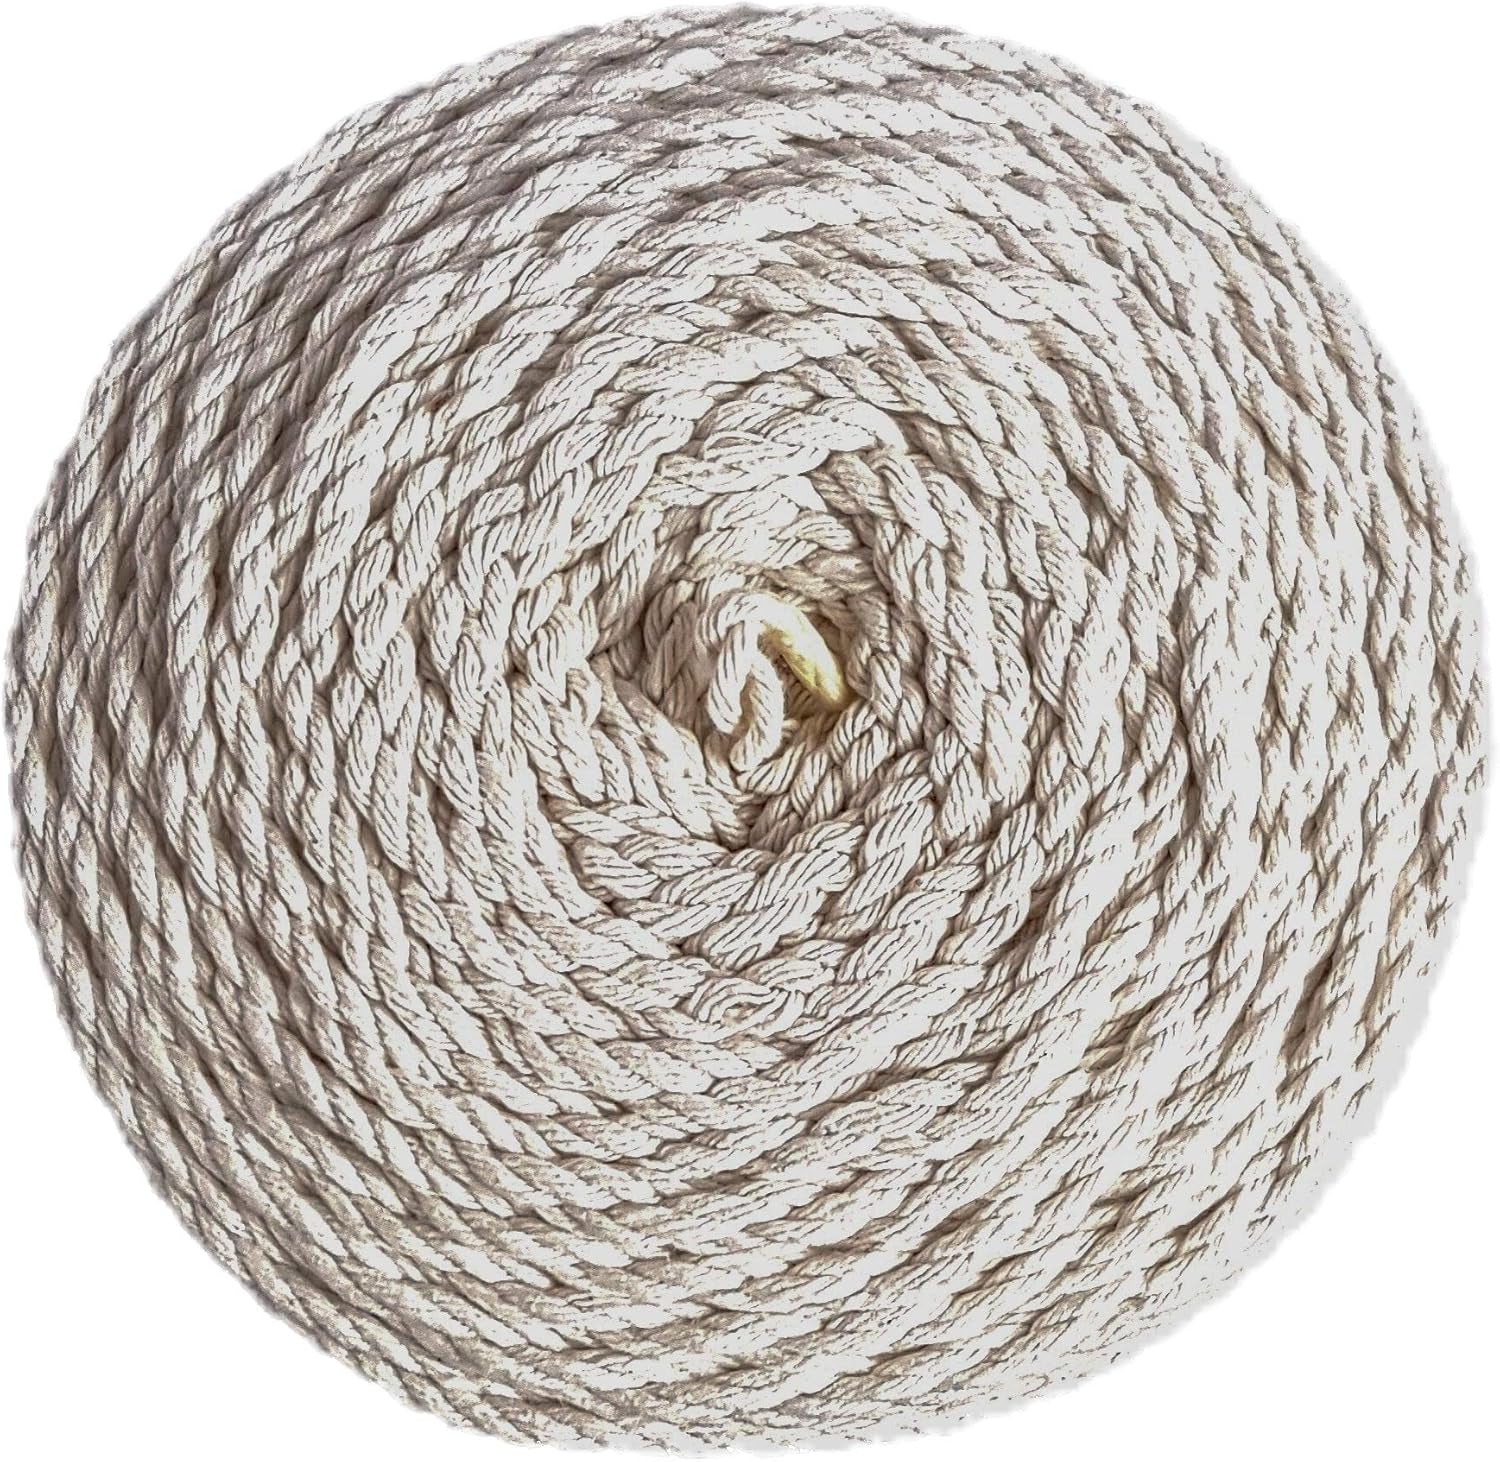 Macrame Cord 4 Mm * 284 Yd (853 Feet) - 3PLY Cotton Rope for Macrame Dream Catcher, Wall Hanging, Plant Hanger, Gift Wrapping and Wedding Decorations